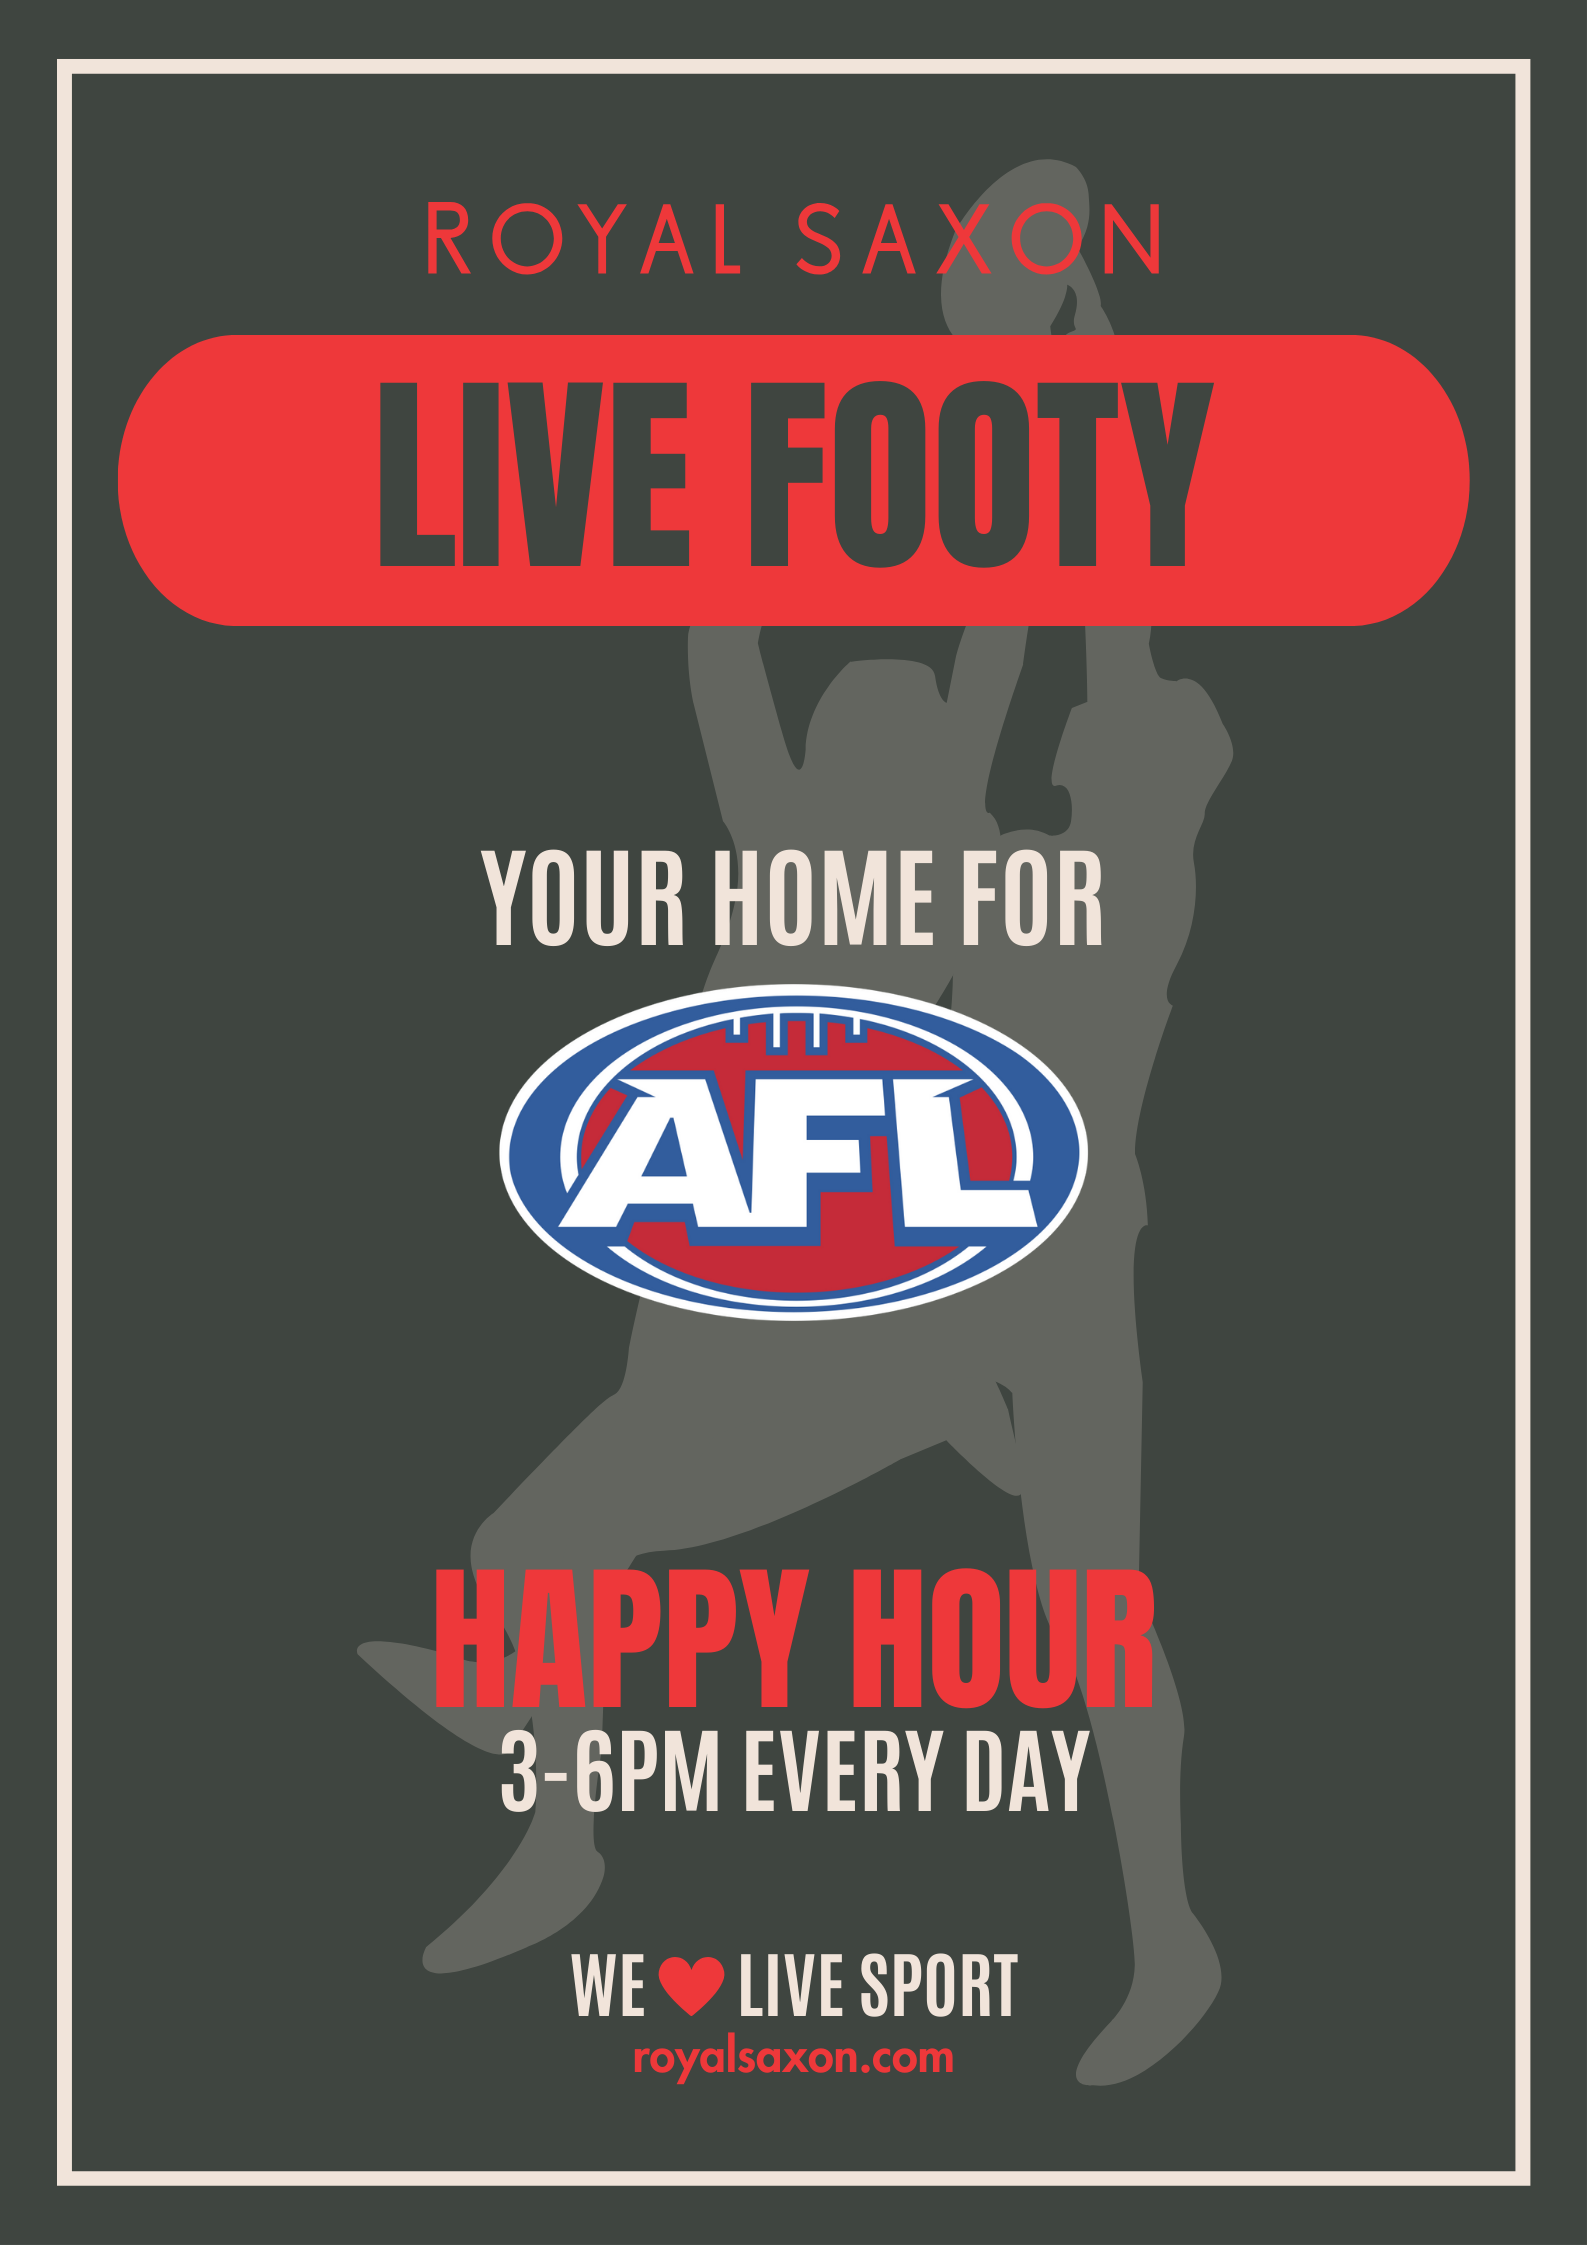 FootyLive_2.png